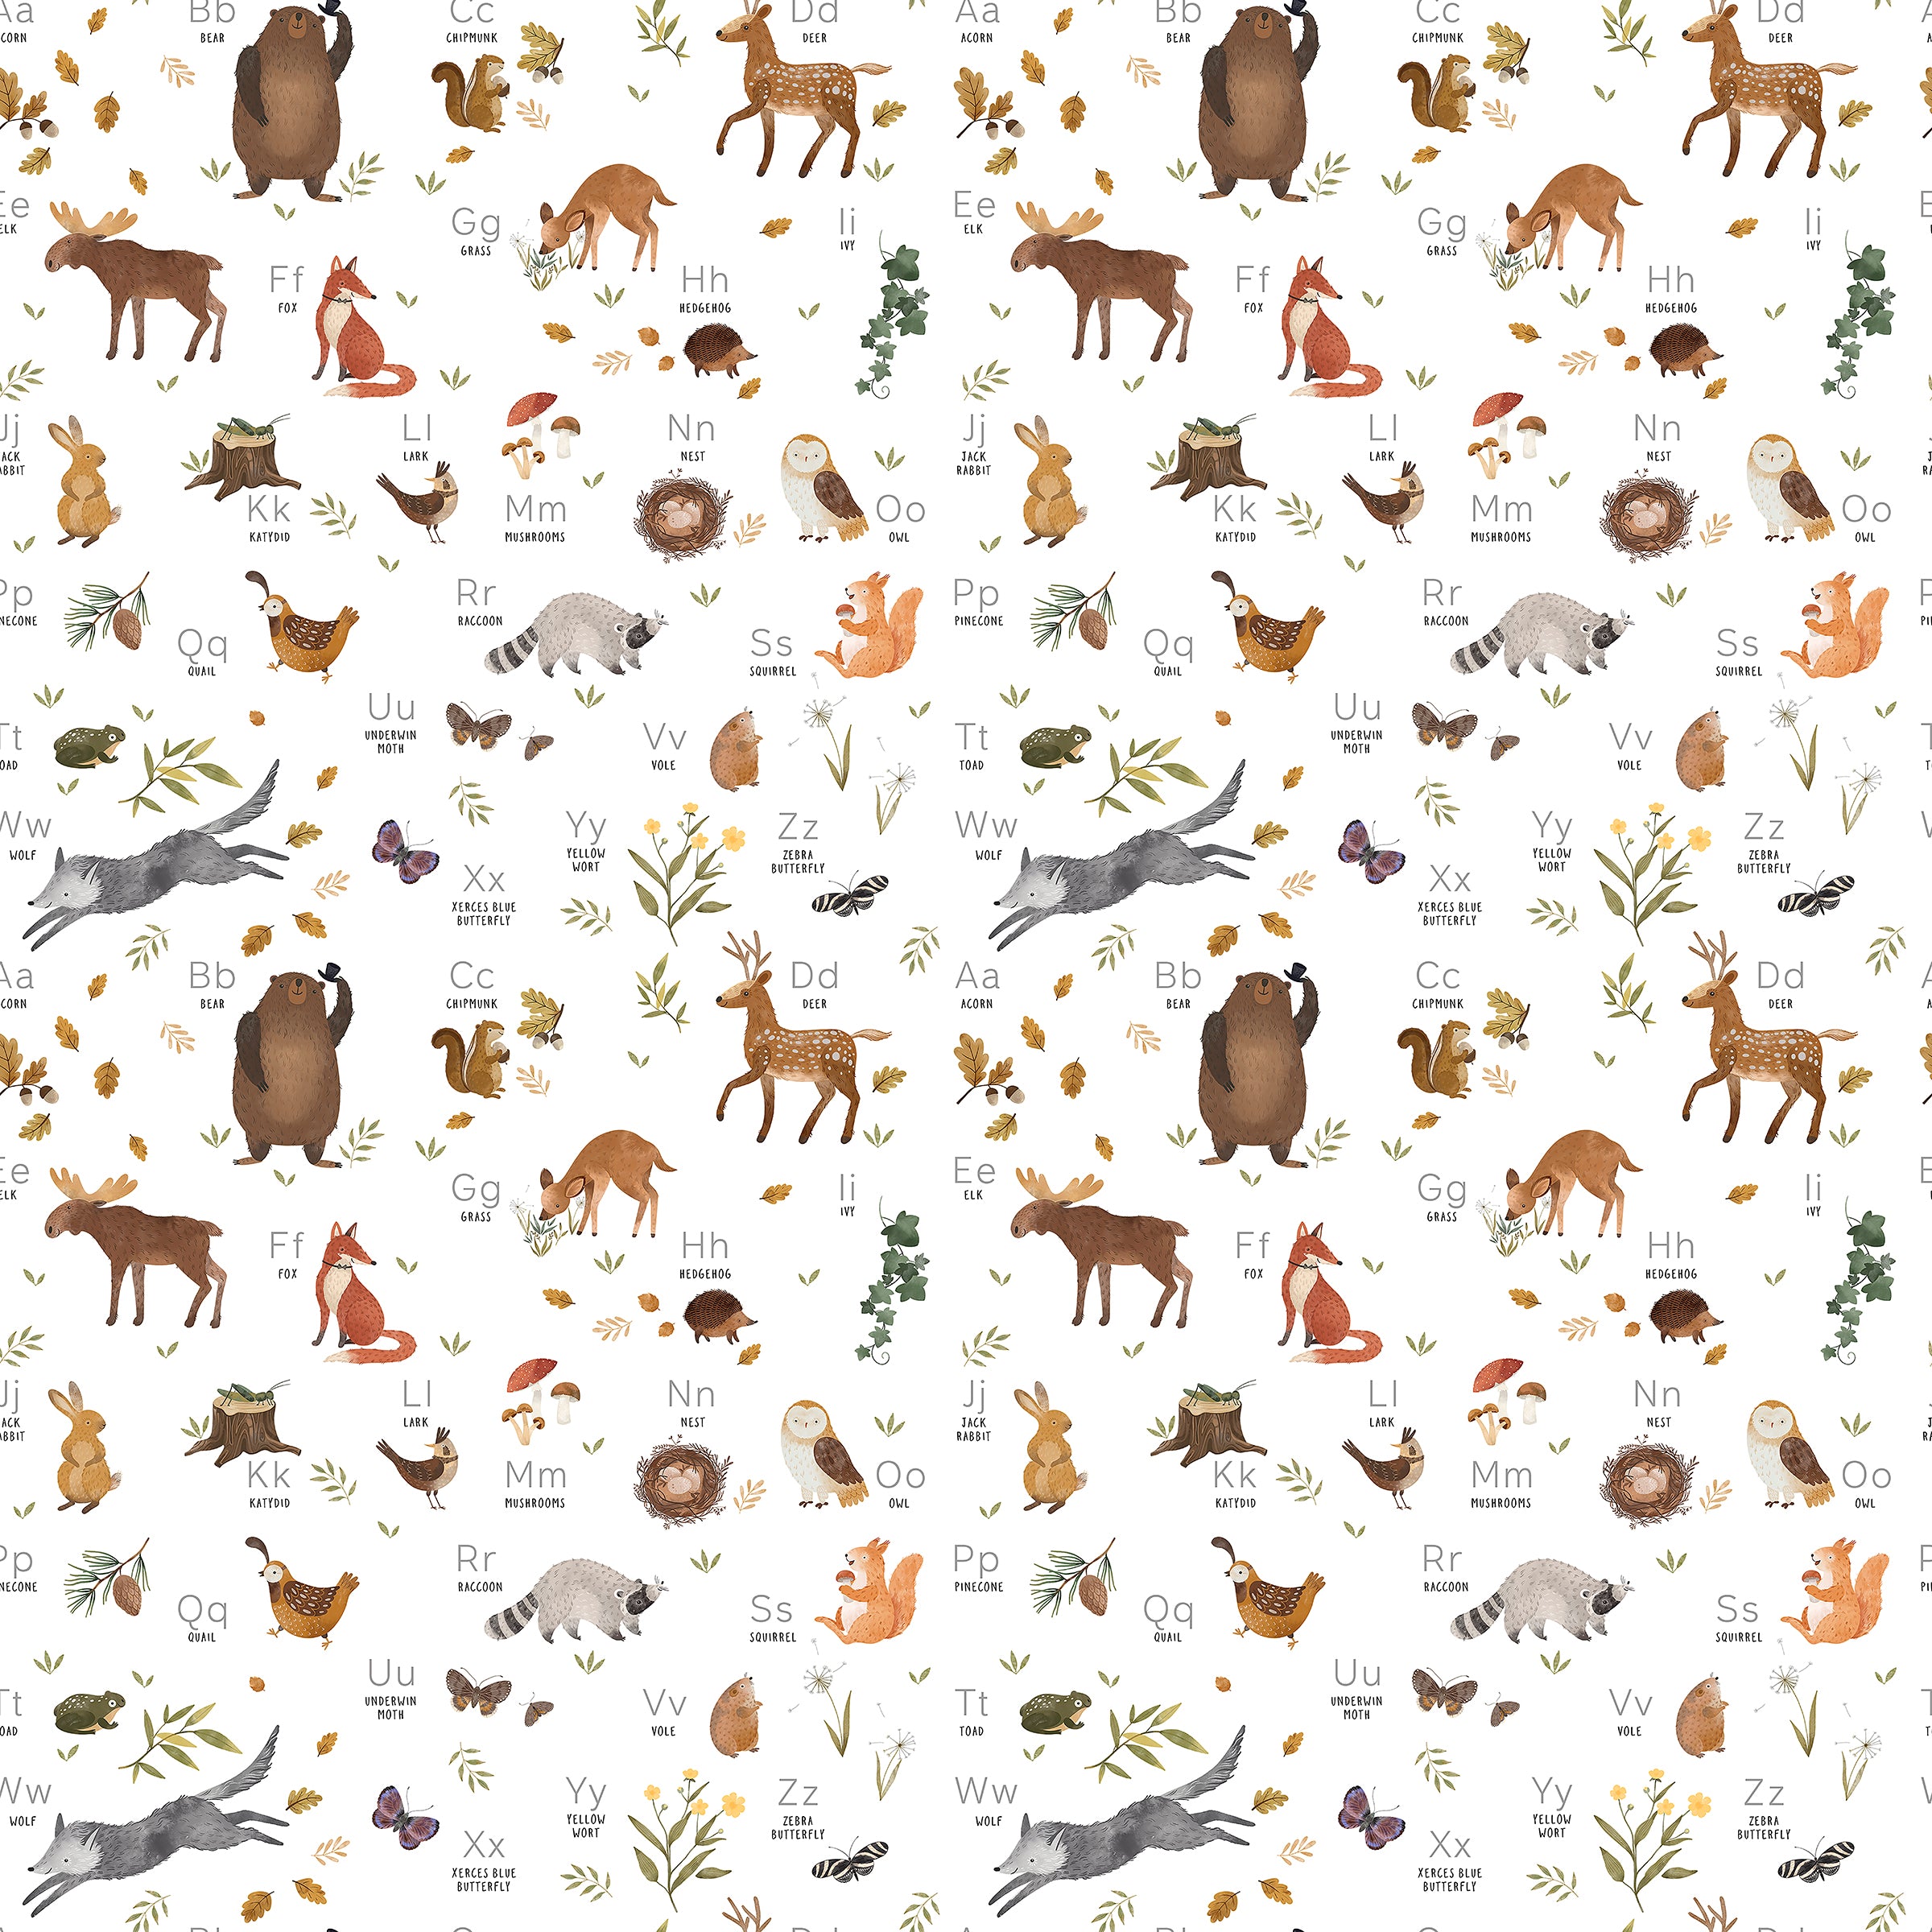 Close-up view of Forest Alphabet Animal Wallpaper II featuring a charming and educational design with an alphabet theme. Each letter is accompanied by a corresponding animal, such as 'A' for antelope and 'B' for bear, illustrated in a playful and colorful style against a white background